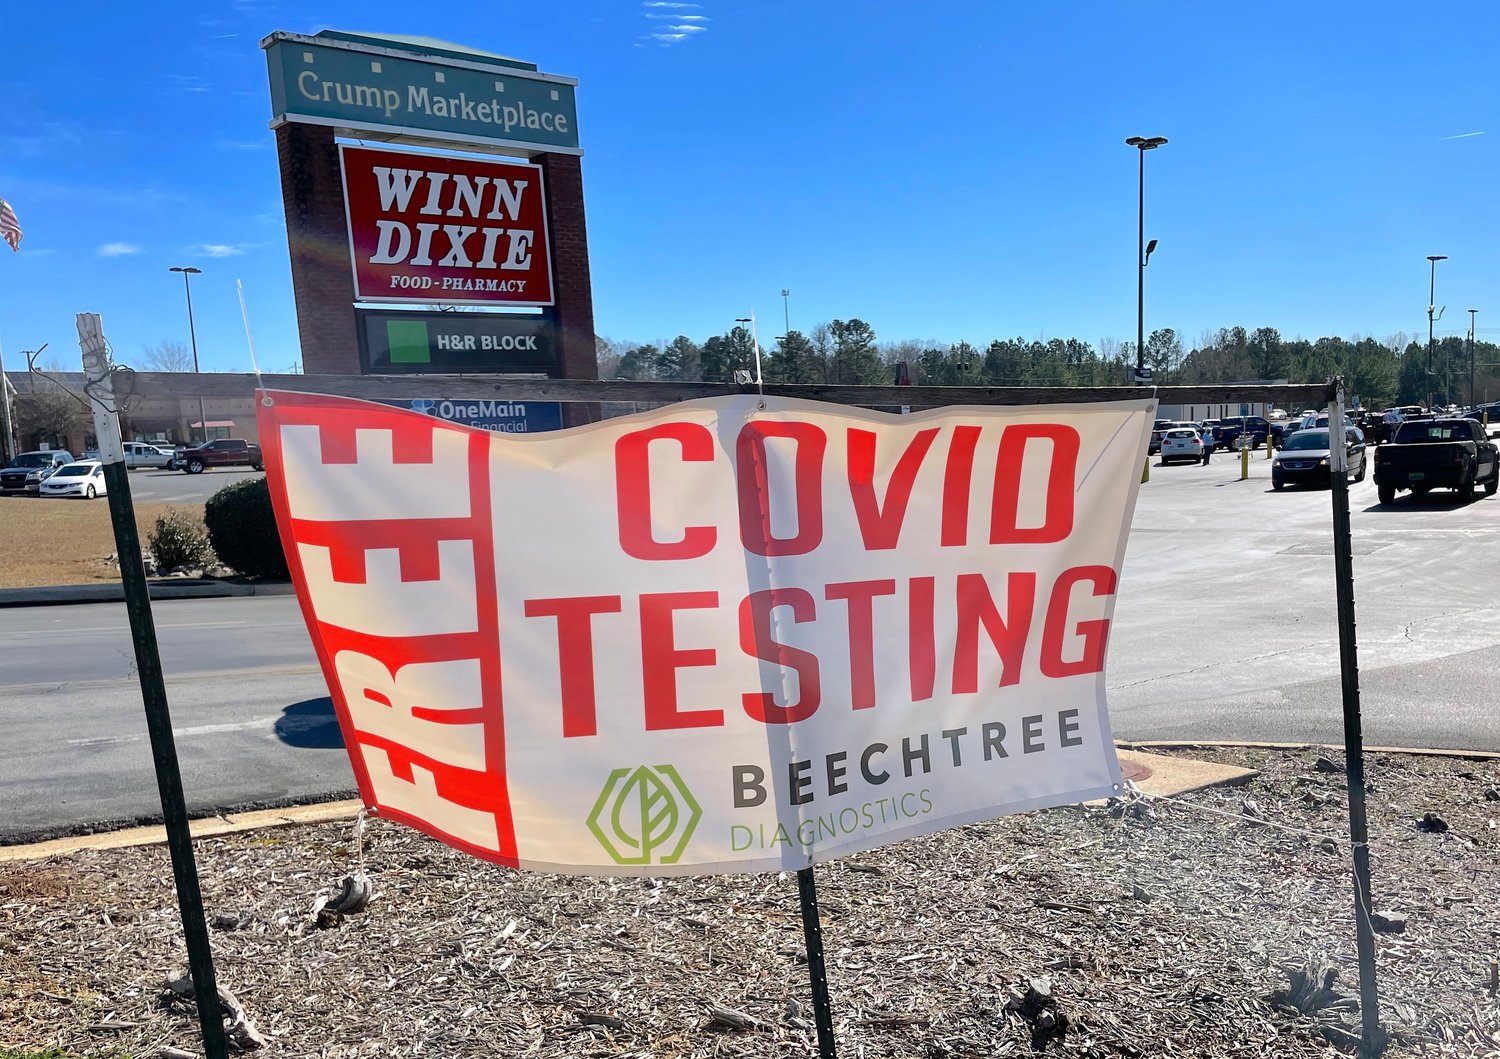 Beechtree Diagnostics is offering free COVID-19 testing in various parts of the county.